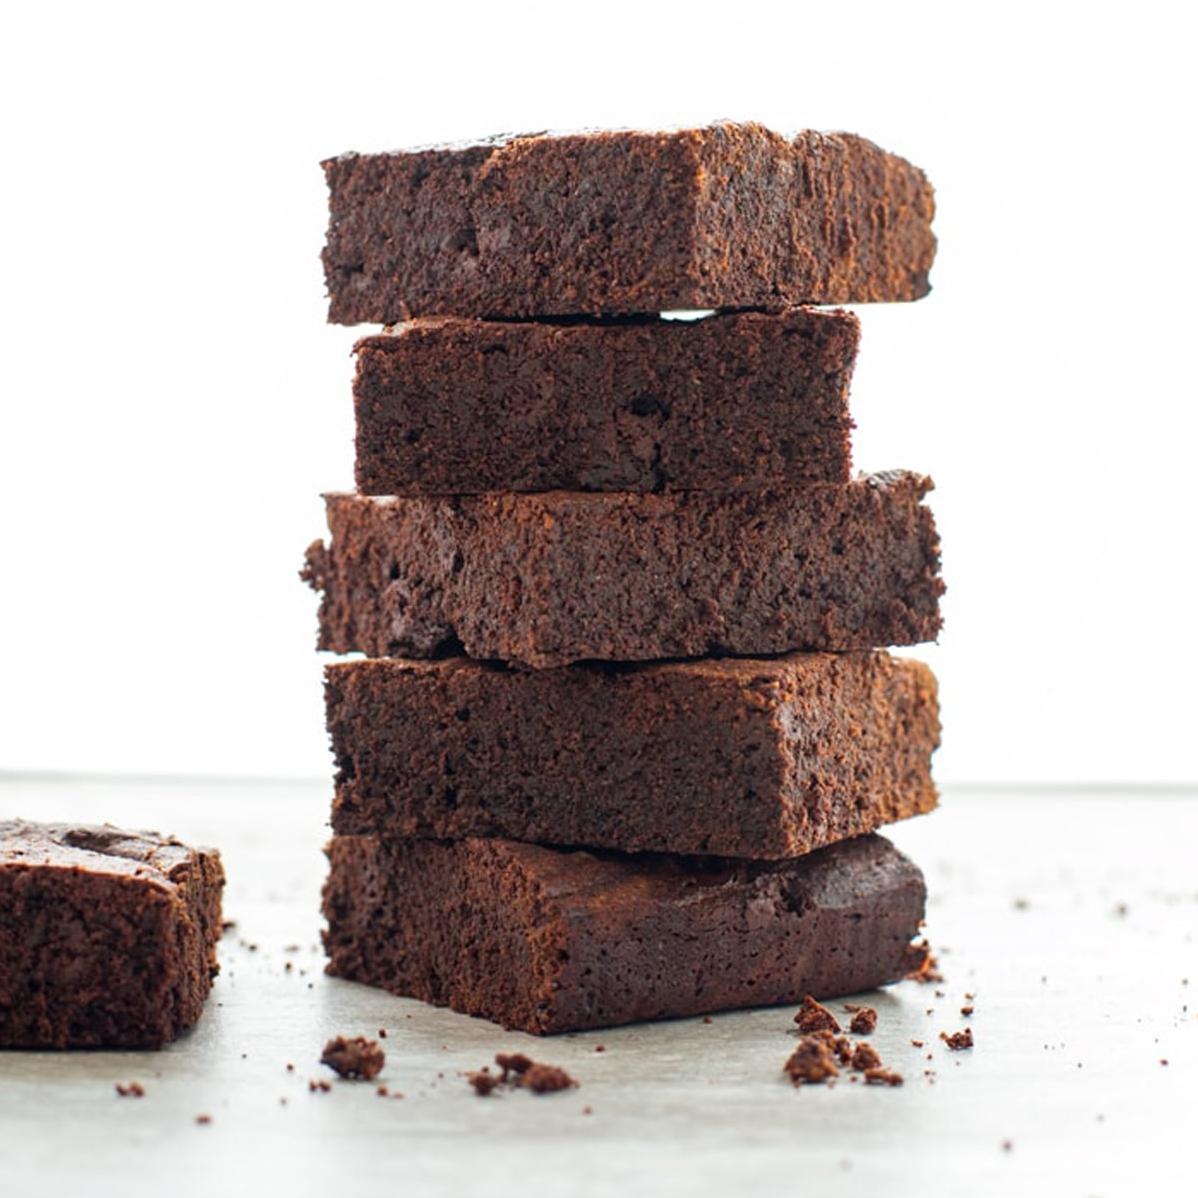  Decadent fudgy brownies that pack a serious caffeine punch.